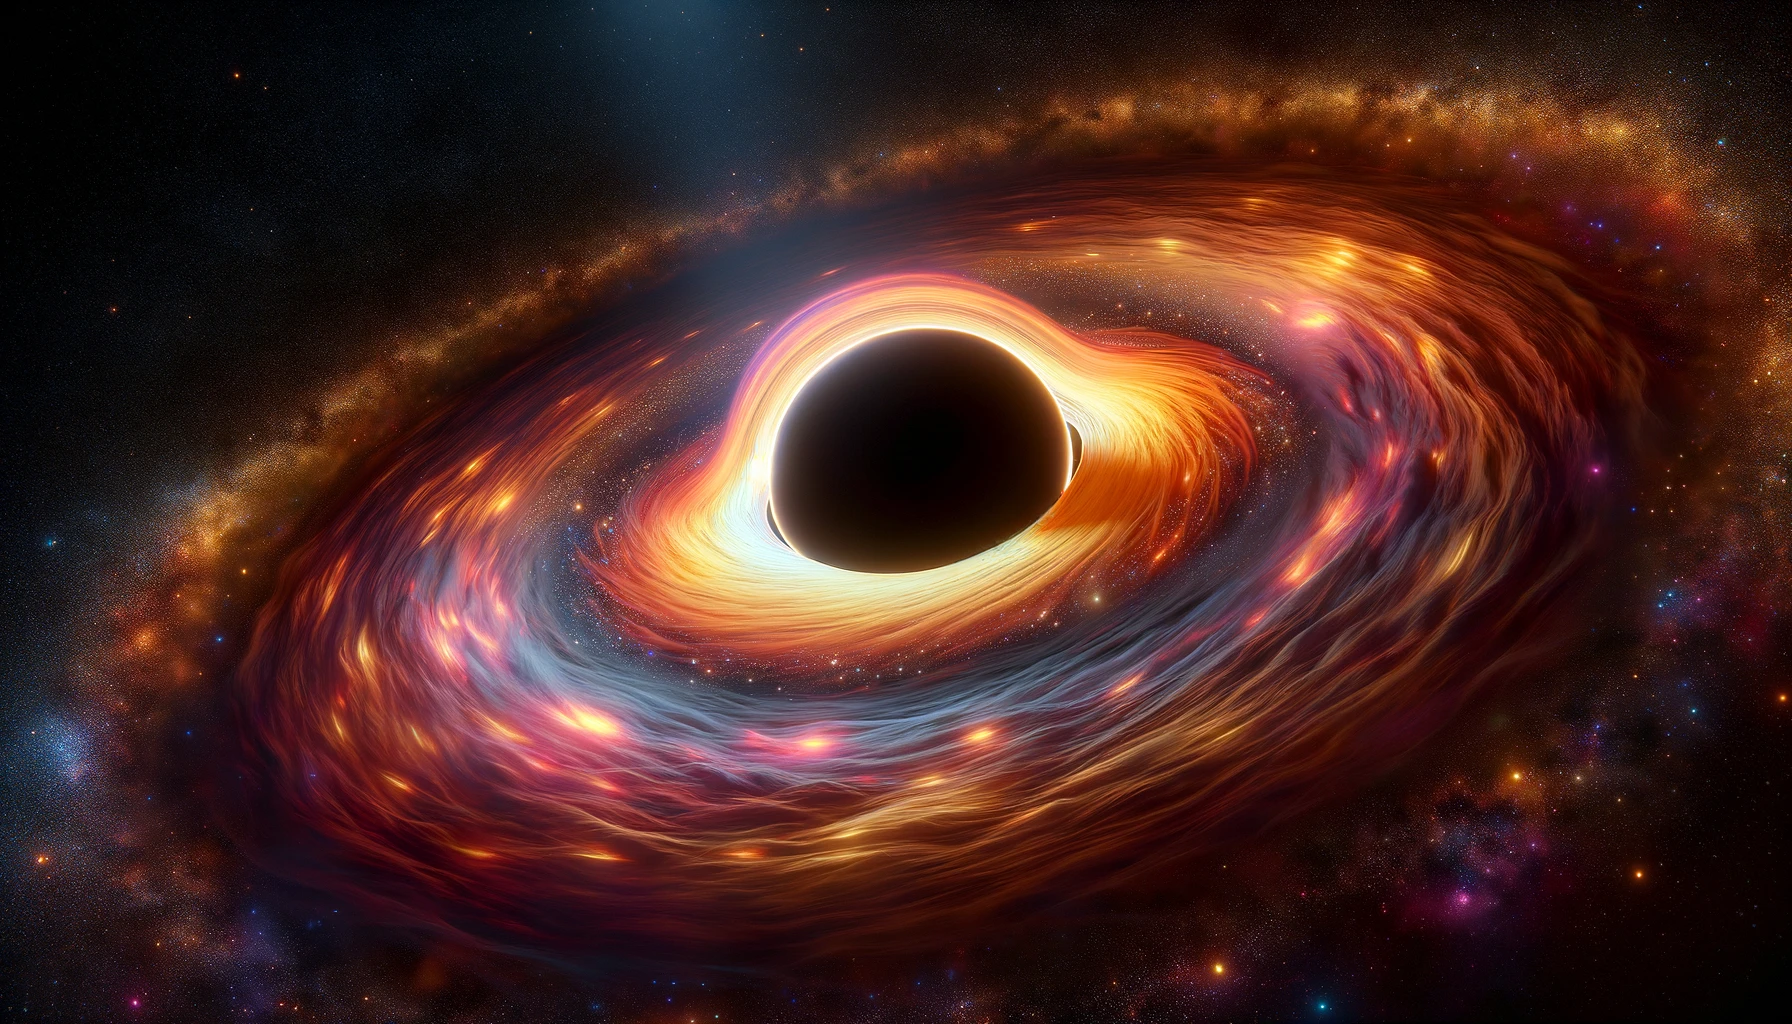 A realistic depiction of a black hole with its surrounding accretion disk. The black hole is central in the image, showing a dark, dense core surrounded by a swirling, luminous accretion disk emitting bright light and colorful gases. The background is a starry space, enhancing the dramatic contrast between the dark black hole and the vibrant disk.